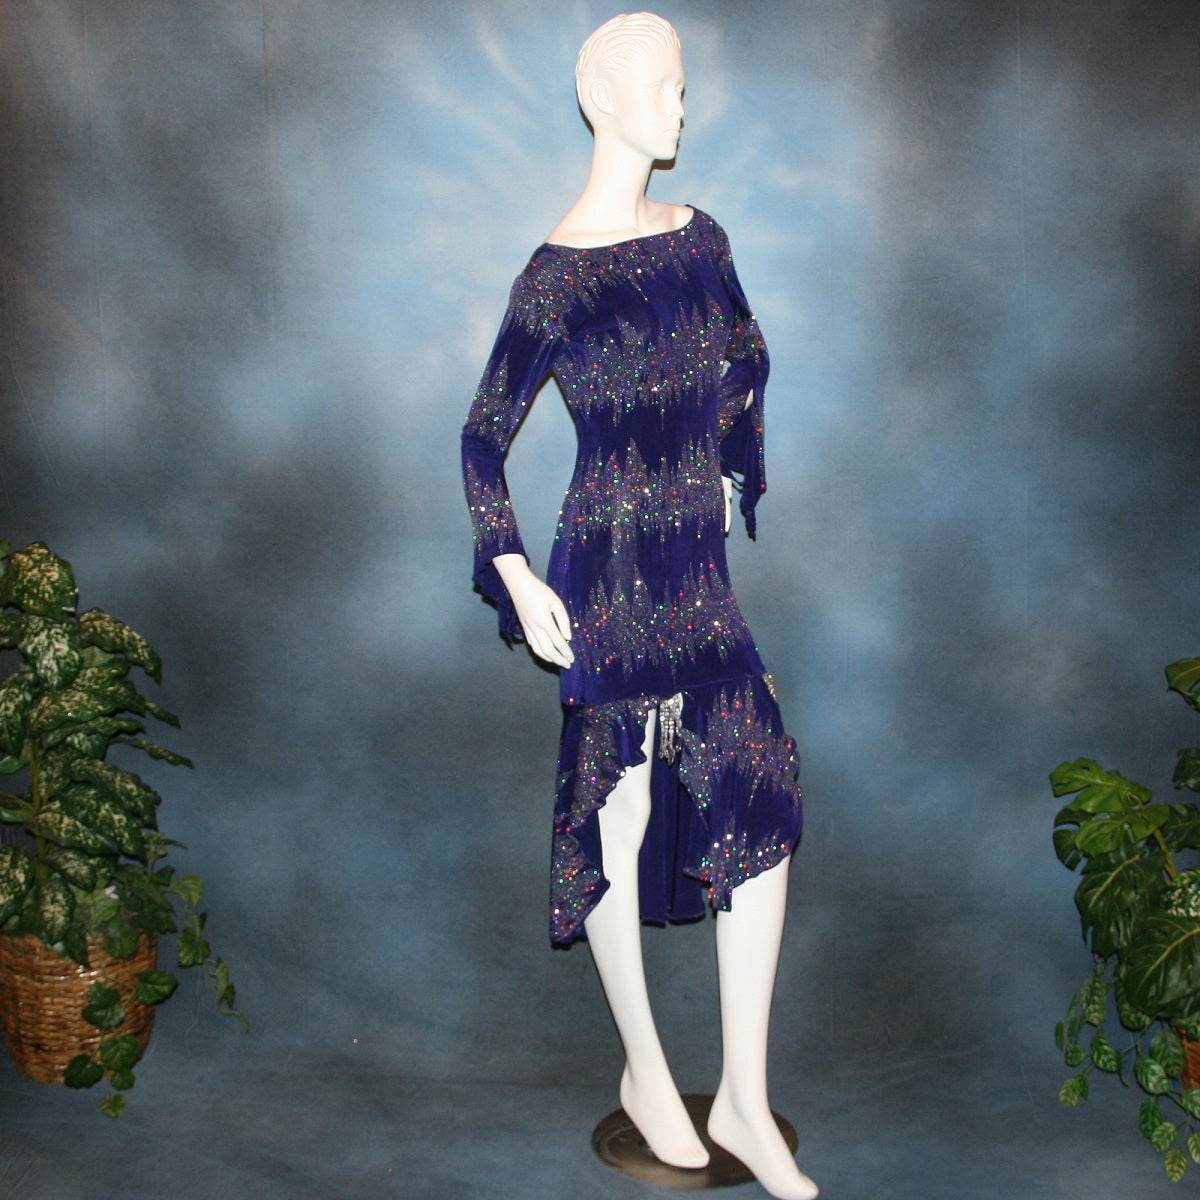 side view of Deep royal purple Latin/rhythm/tango dress created in deep royal purple glitter slinky with an awesome electrifying glitter pattern features long flaired sleeves, lattice strap detailing up the low back & a touch of hand beading in skirting slits.